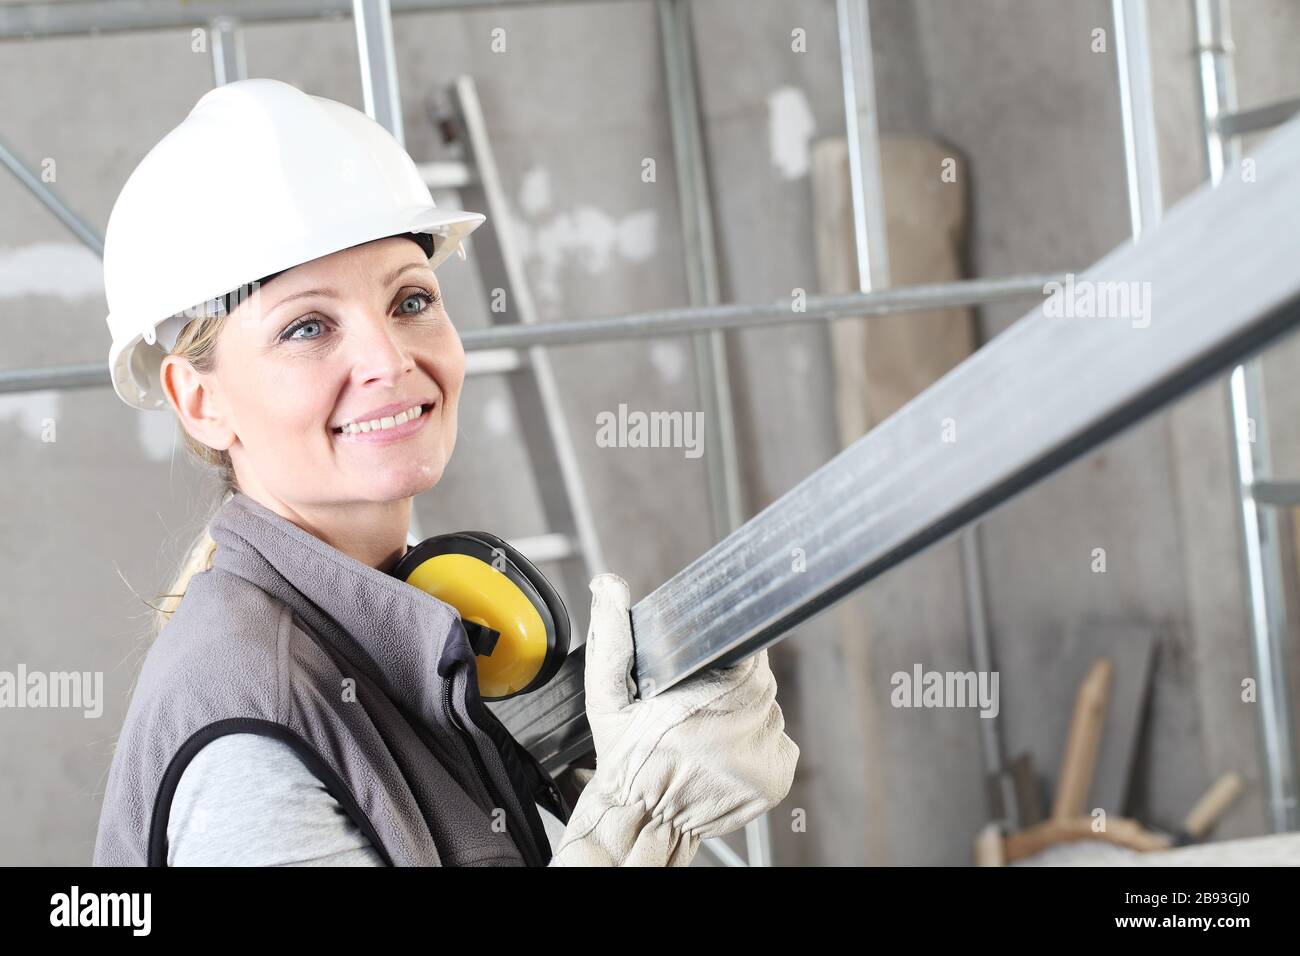 smiling woman construction worker builder portrait wearing white helmet and hearing protection headphones, holding a metal stud for drywall on interio Stock Photo